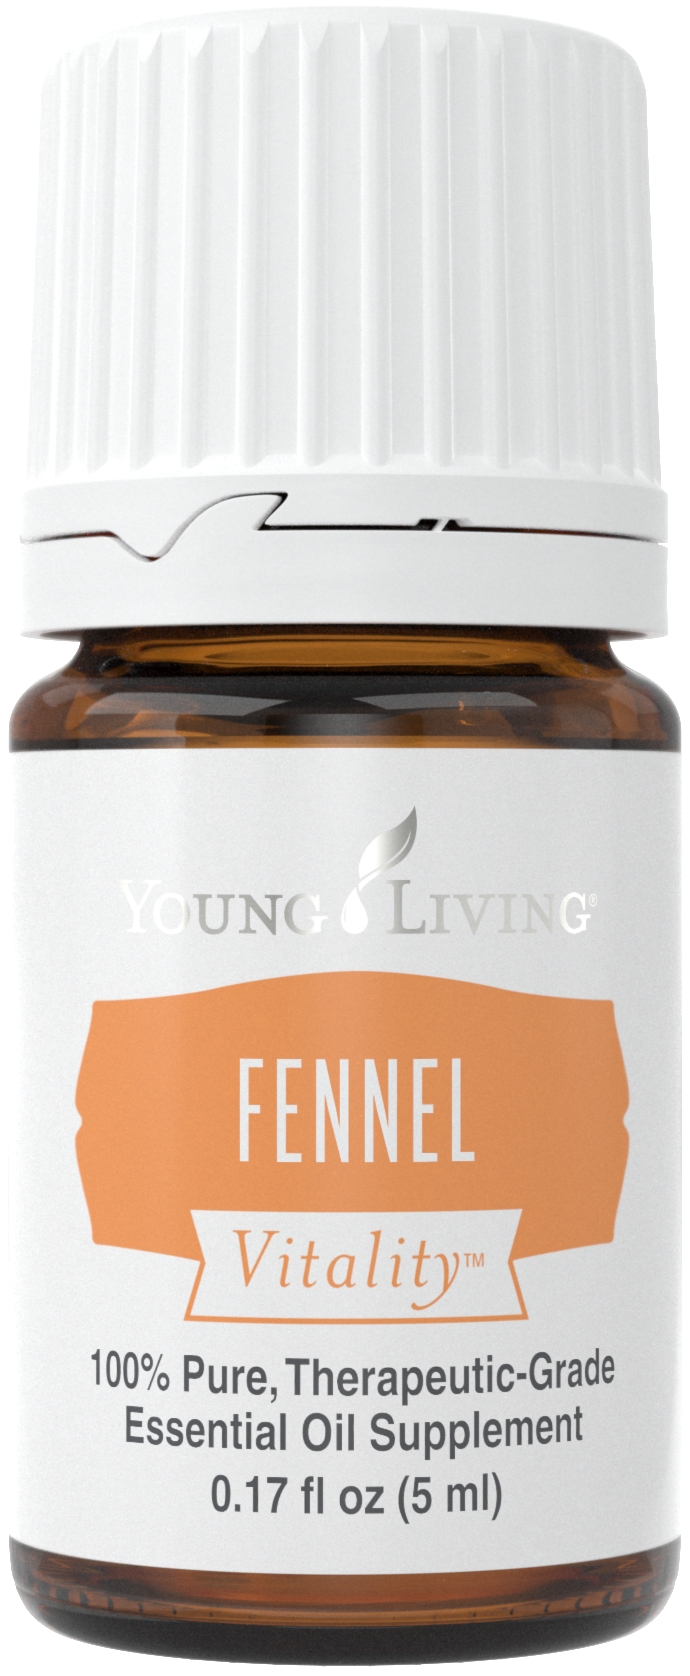 Fennel vitality essential oil | Young Living essential oil